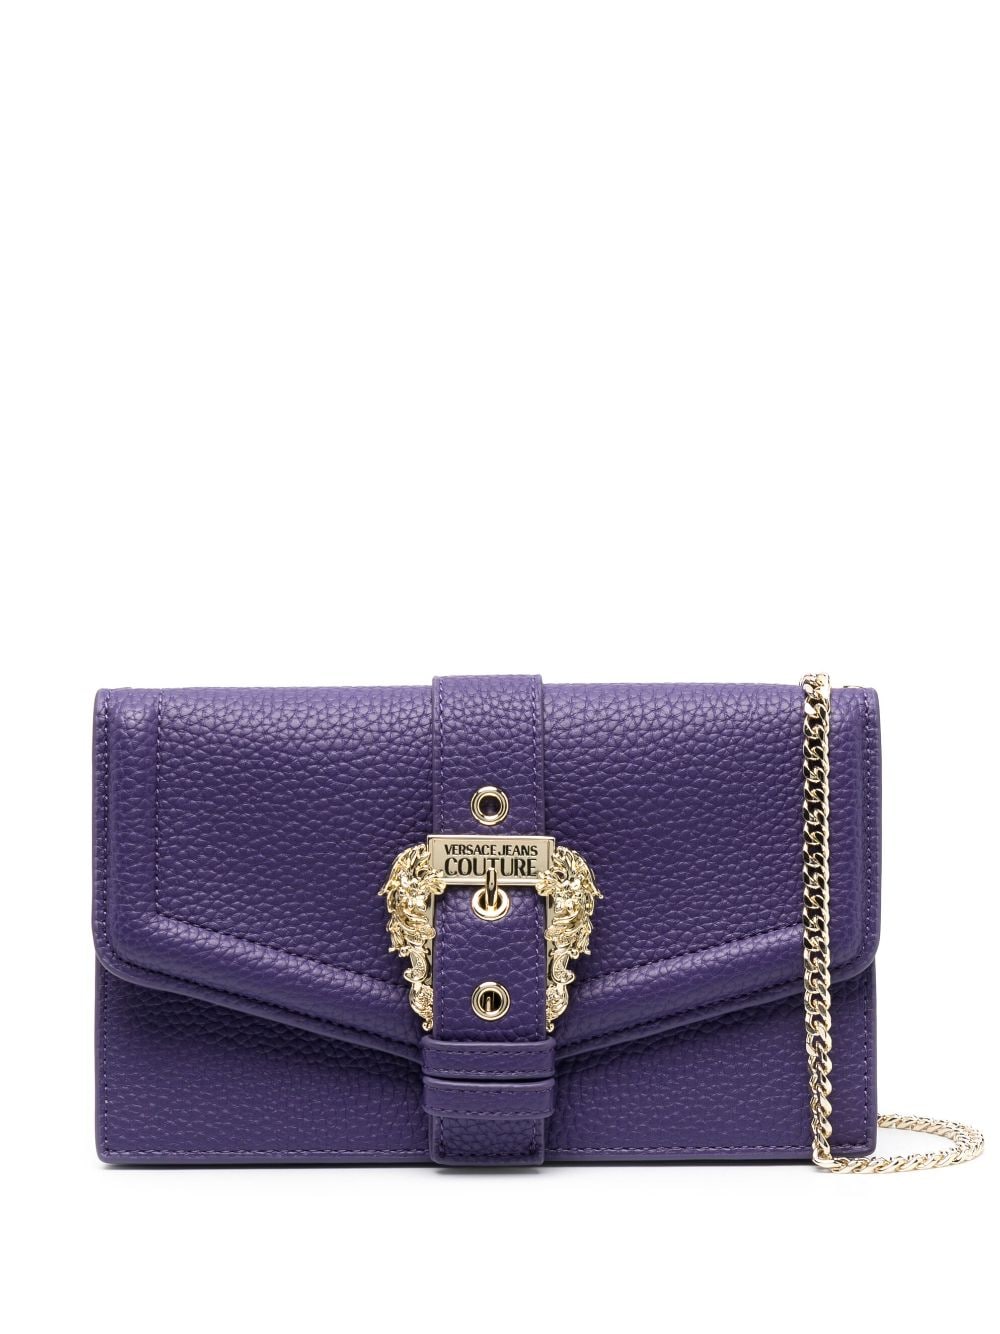 Versace Jeans Couture Couture1 logo-buckle clutch bag - Purple von Versace Jeans Couture